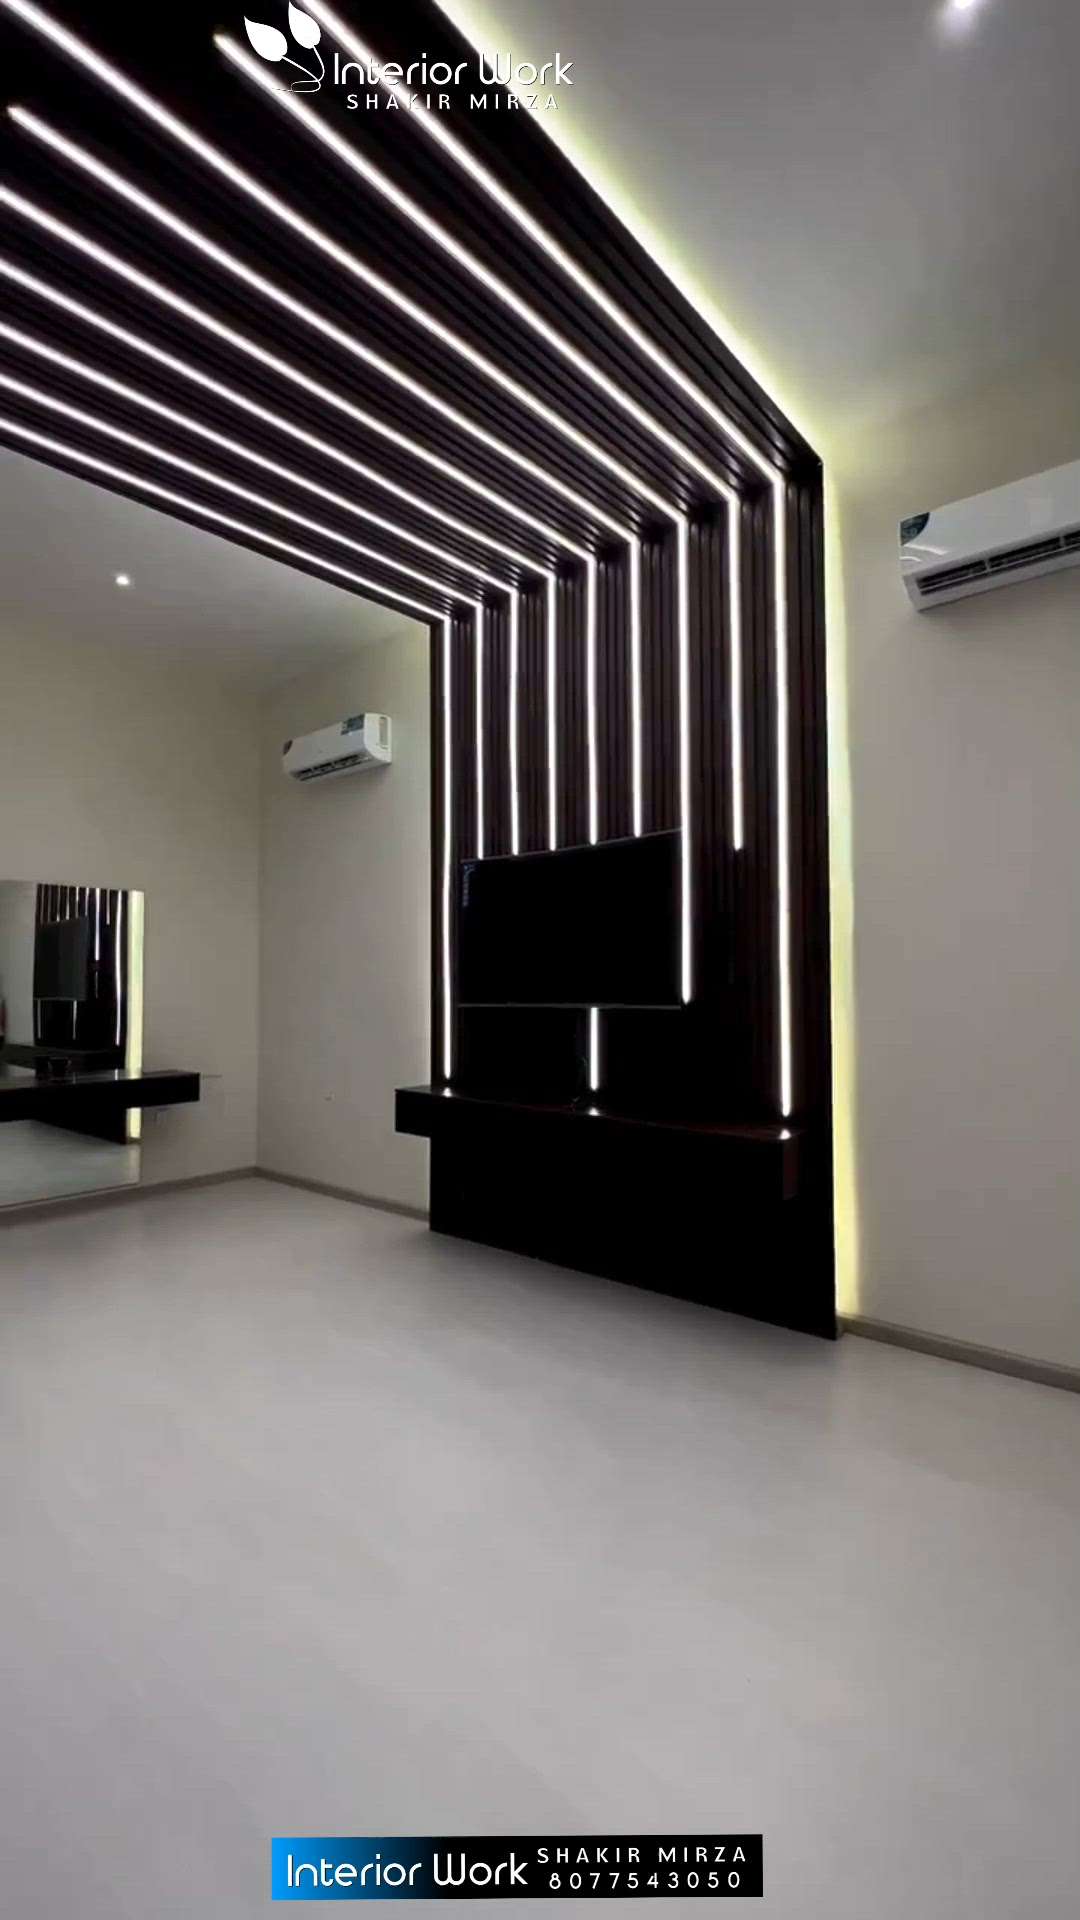 #WALL_PANELLING #tvunitinterior #doublebed #Kitchen #MasterBedroom #contact#me-9027957097